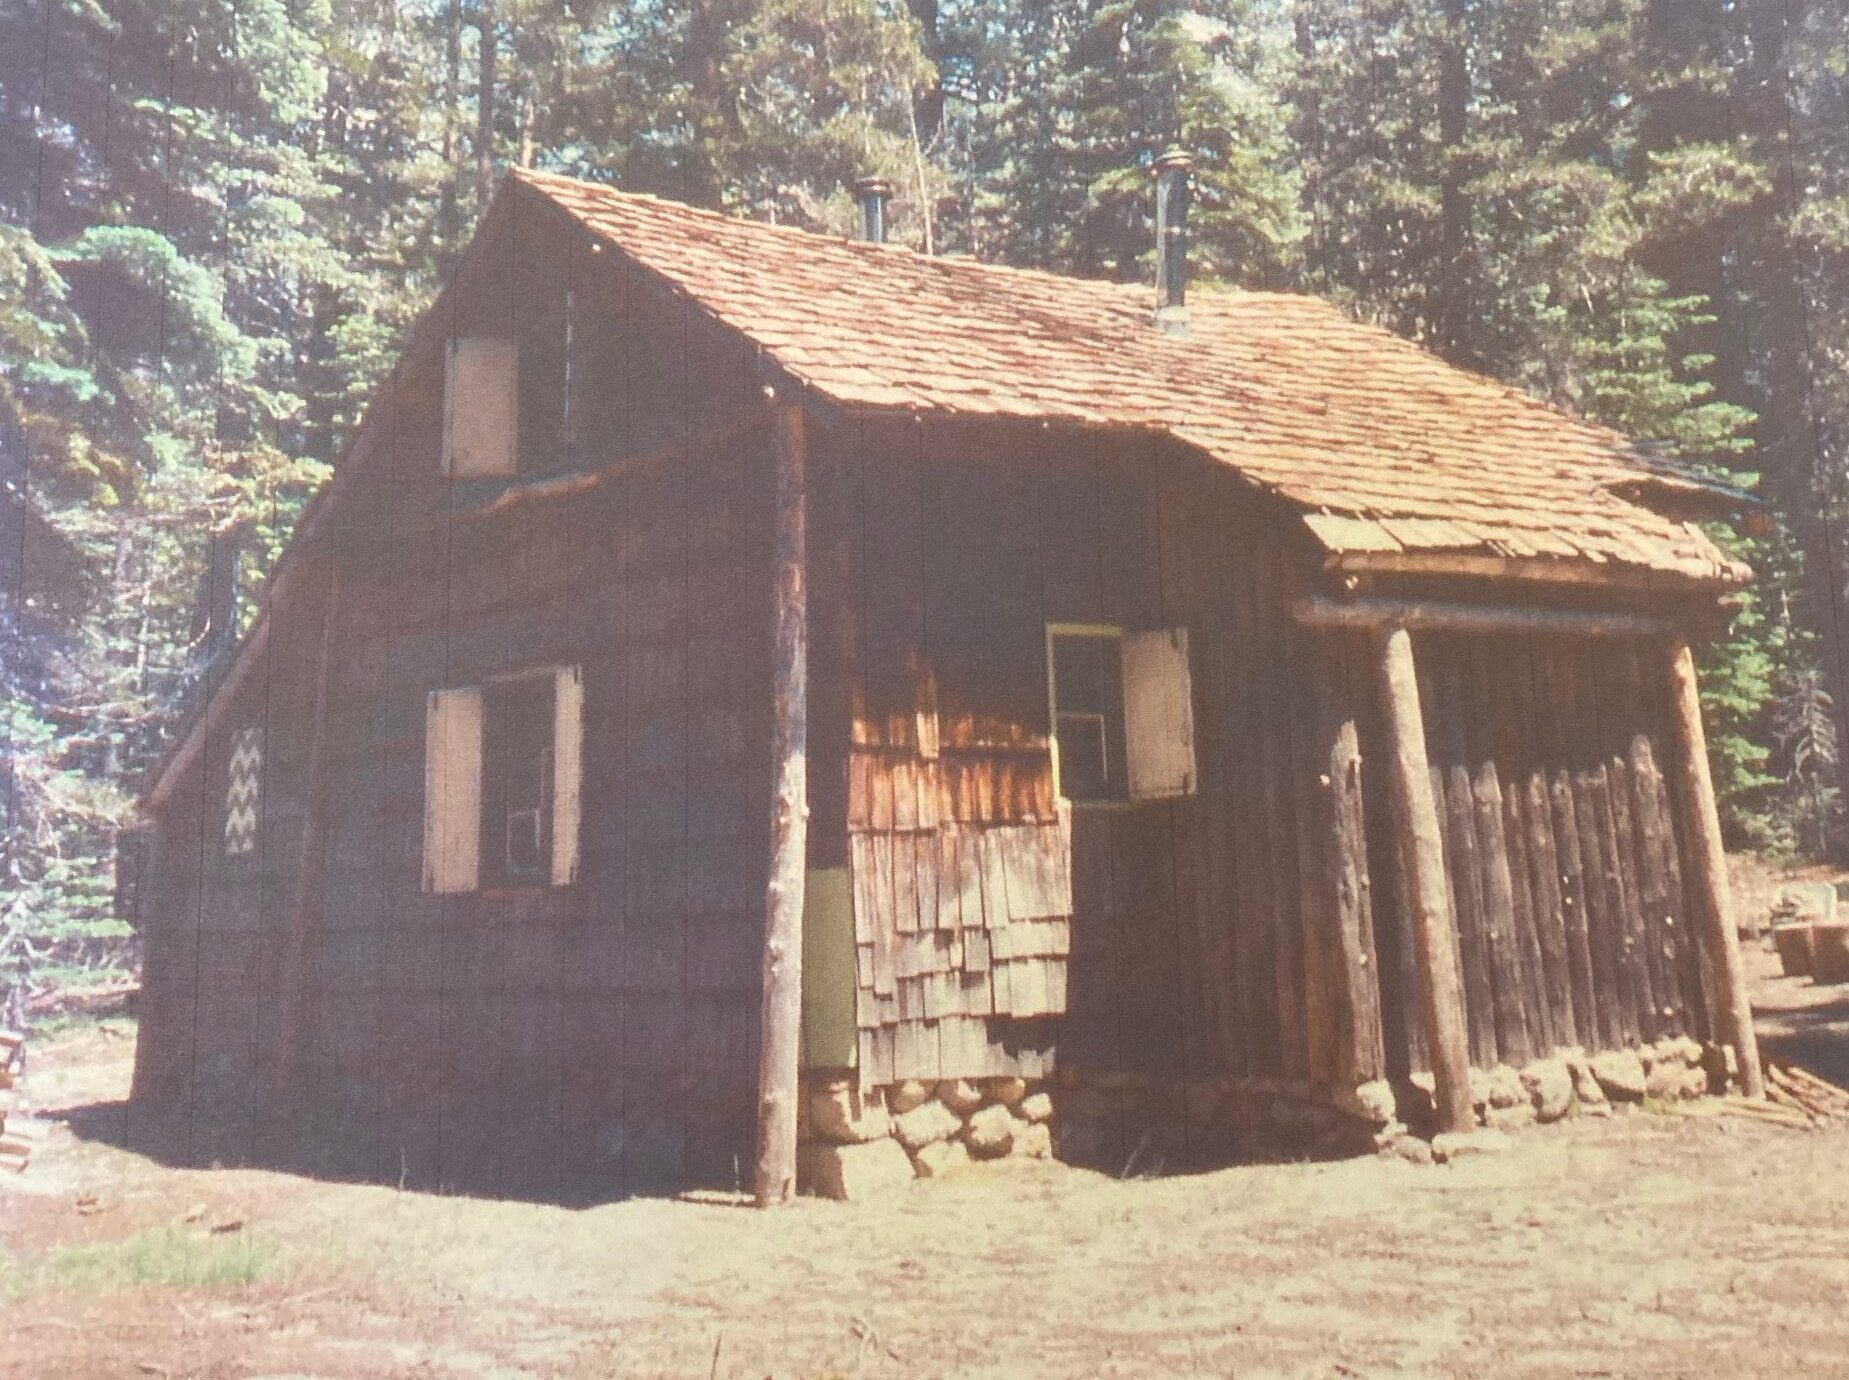 Restored roof shingle on the Snow Creek Cabin 1968